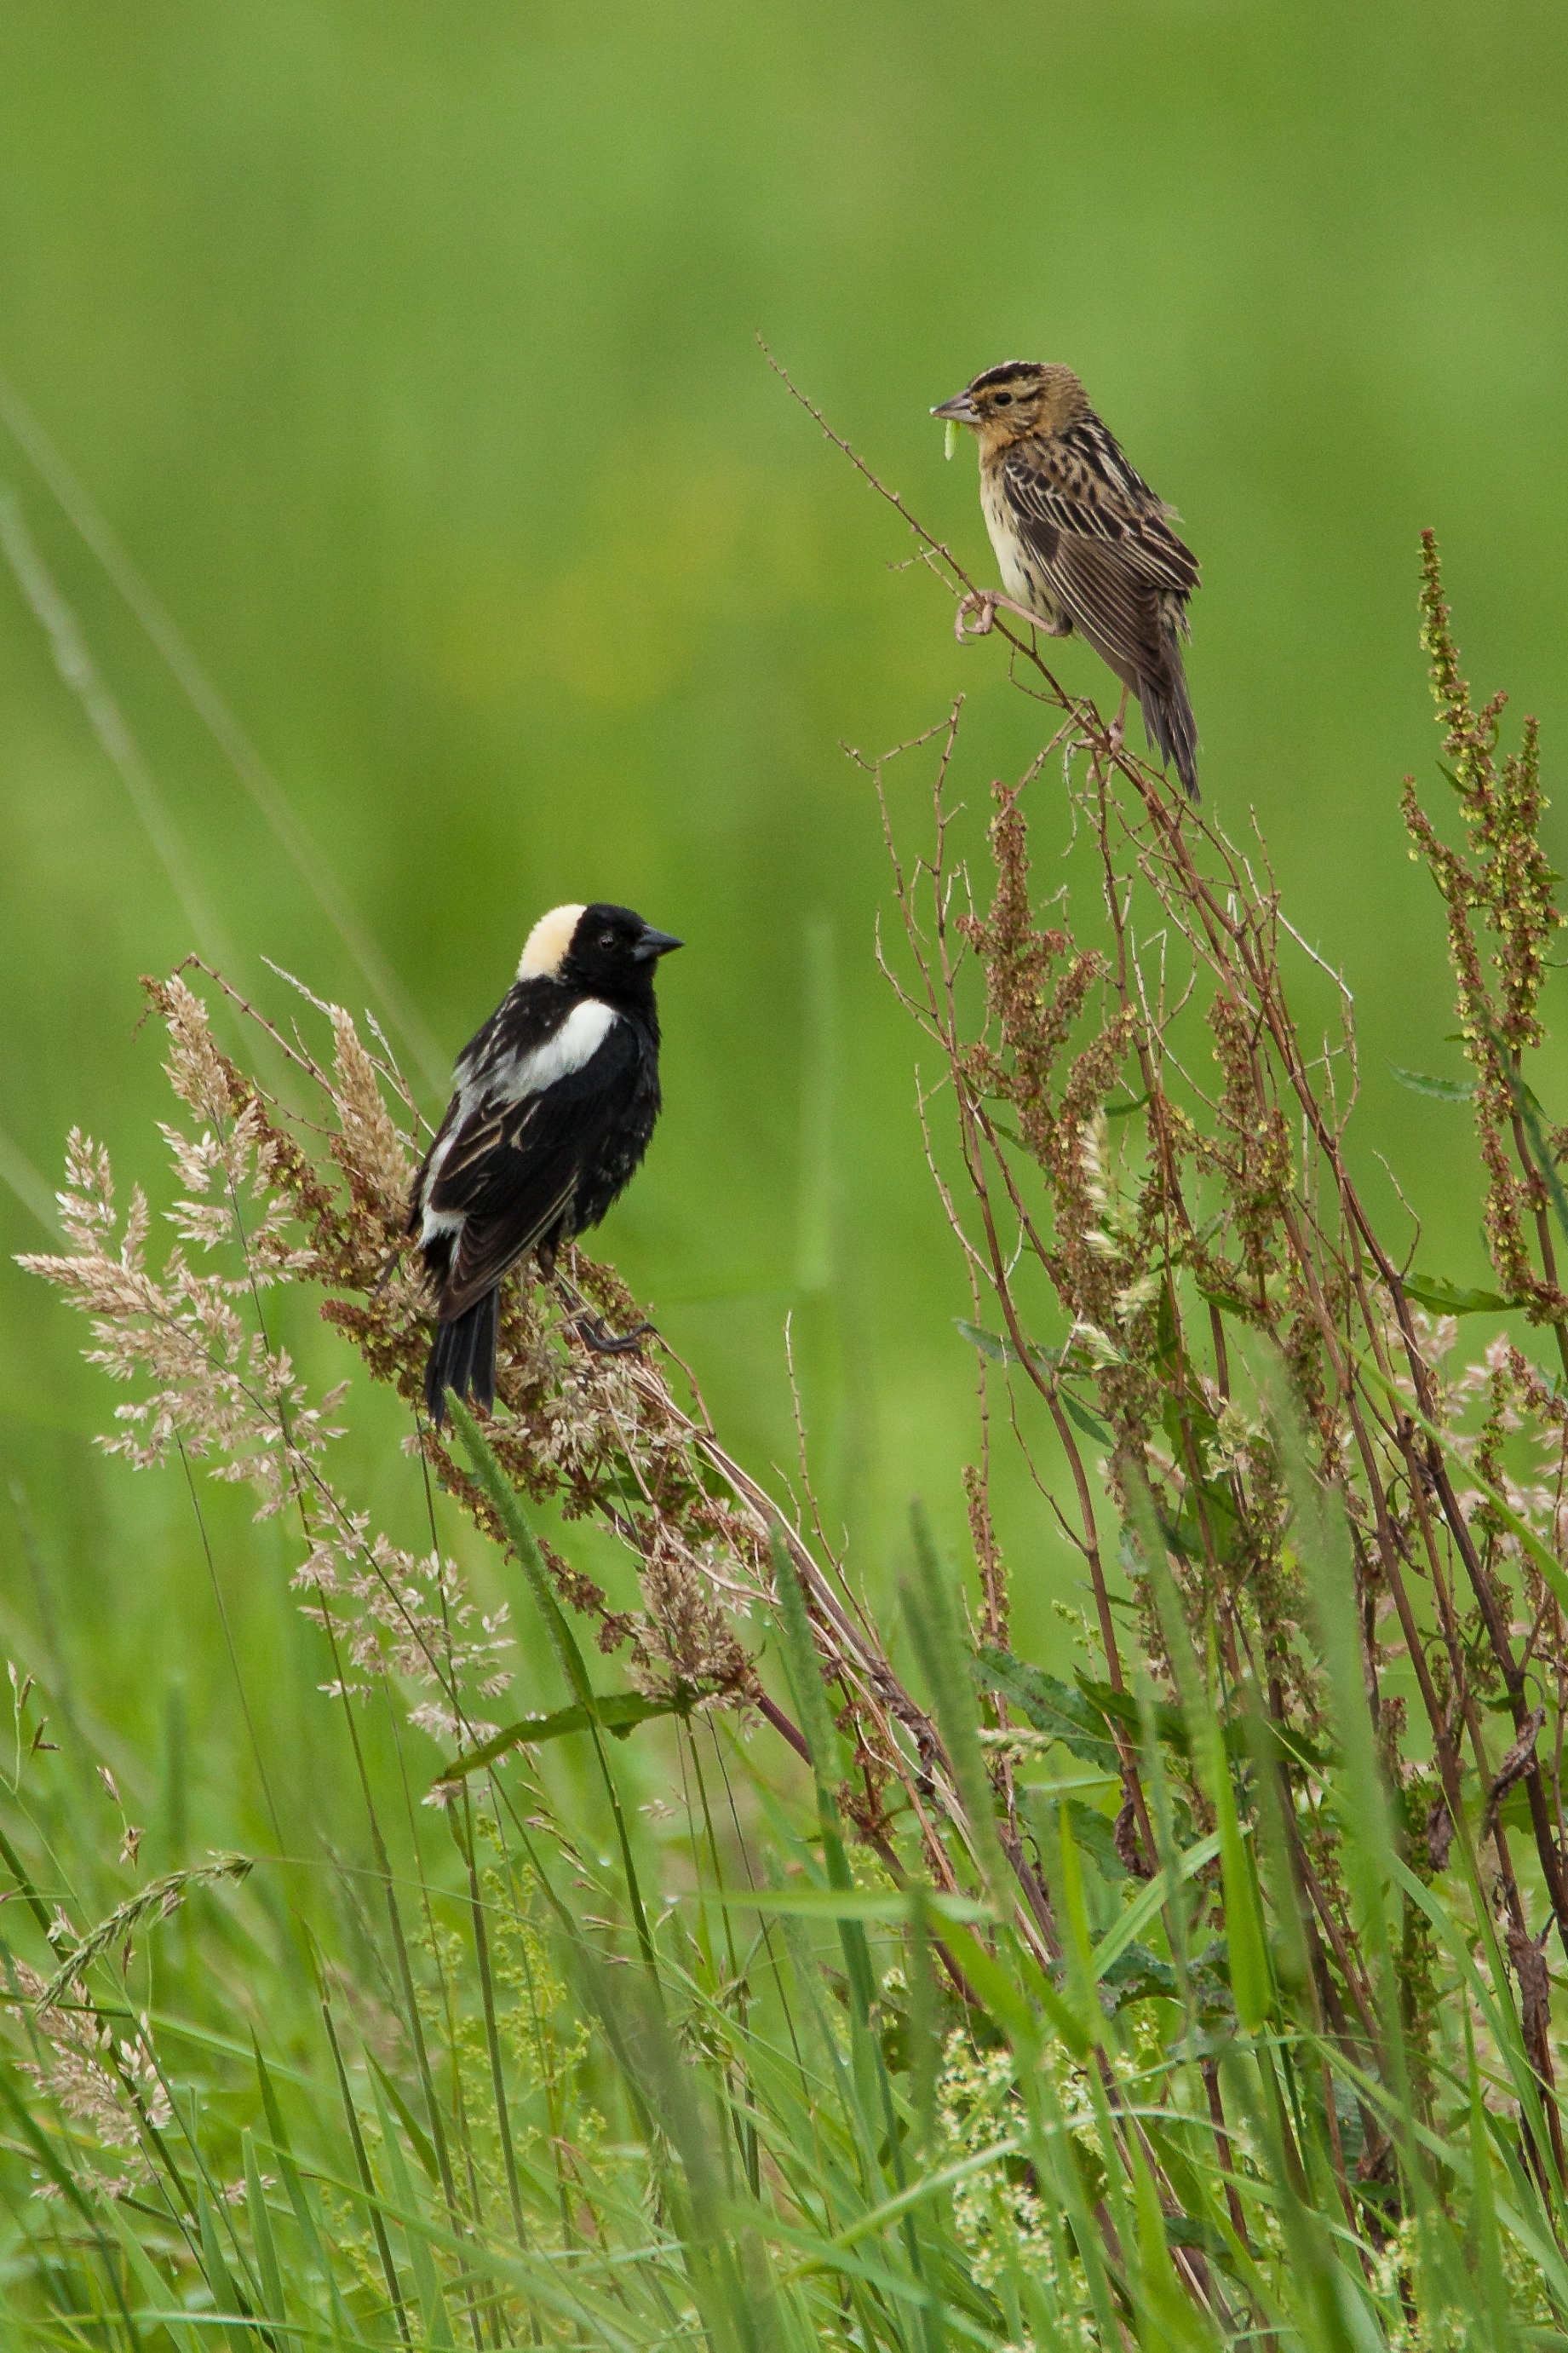 A male and female bobolink pair sitting on tall grasses.